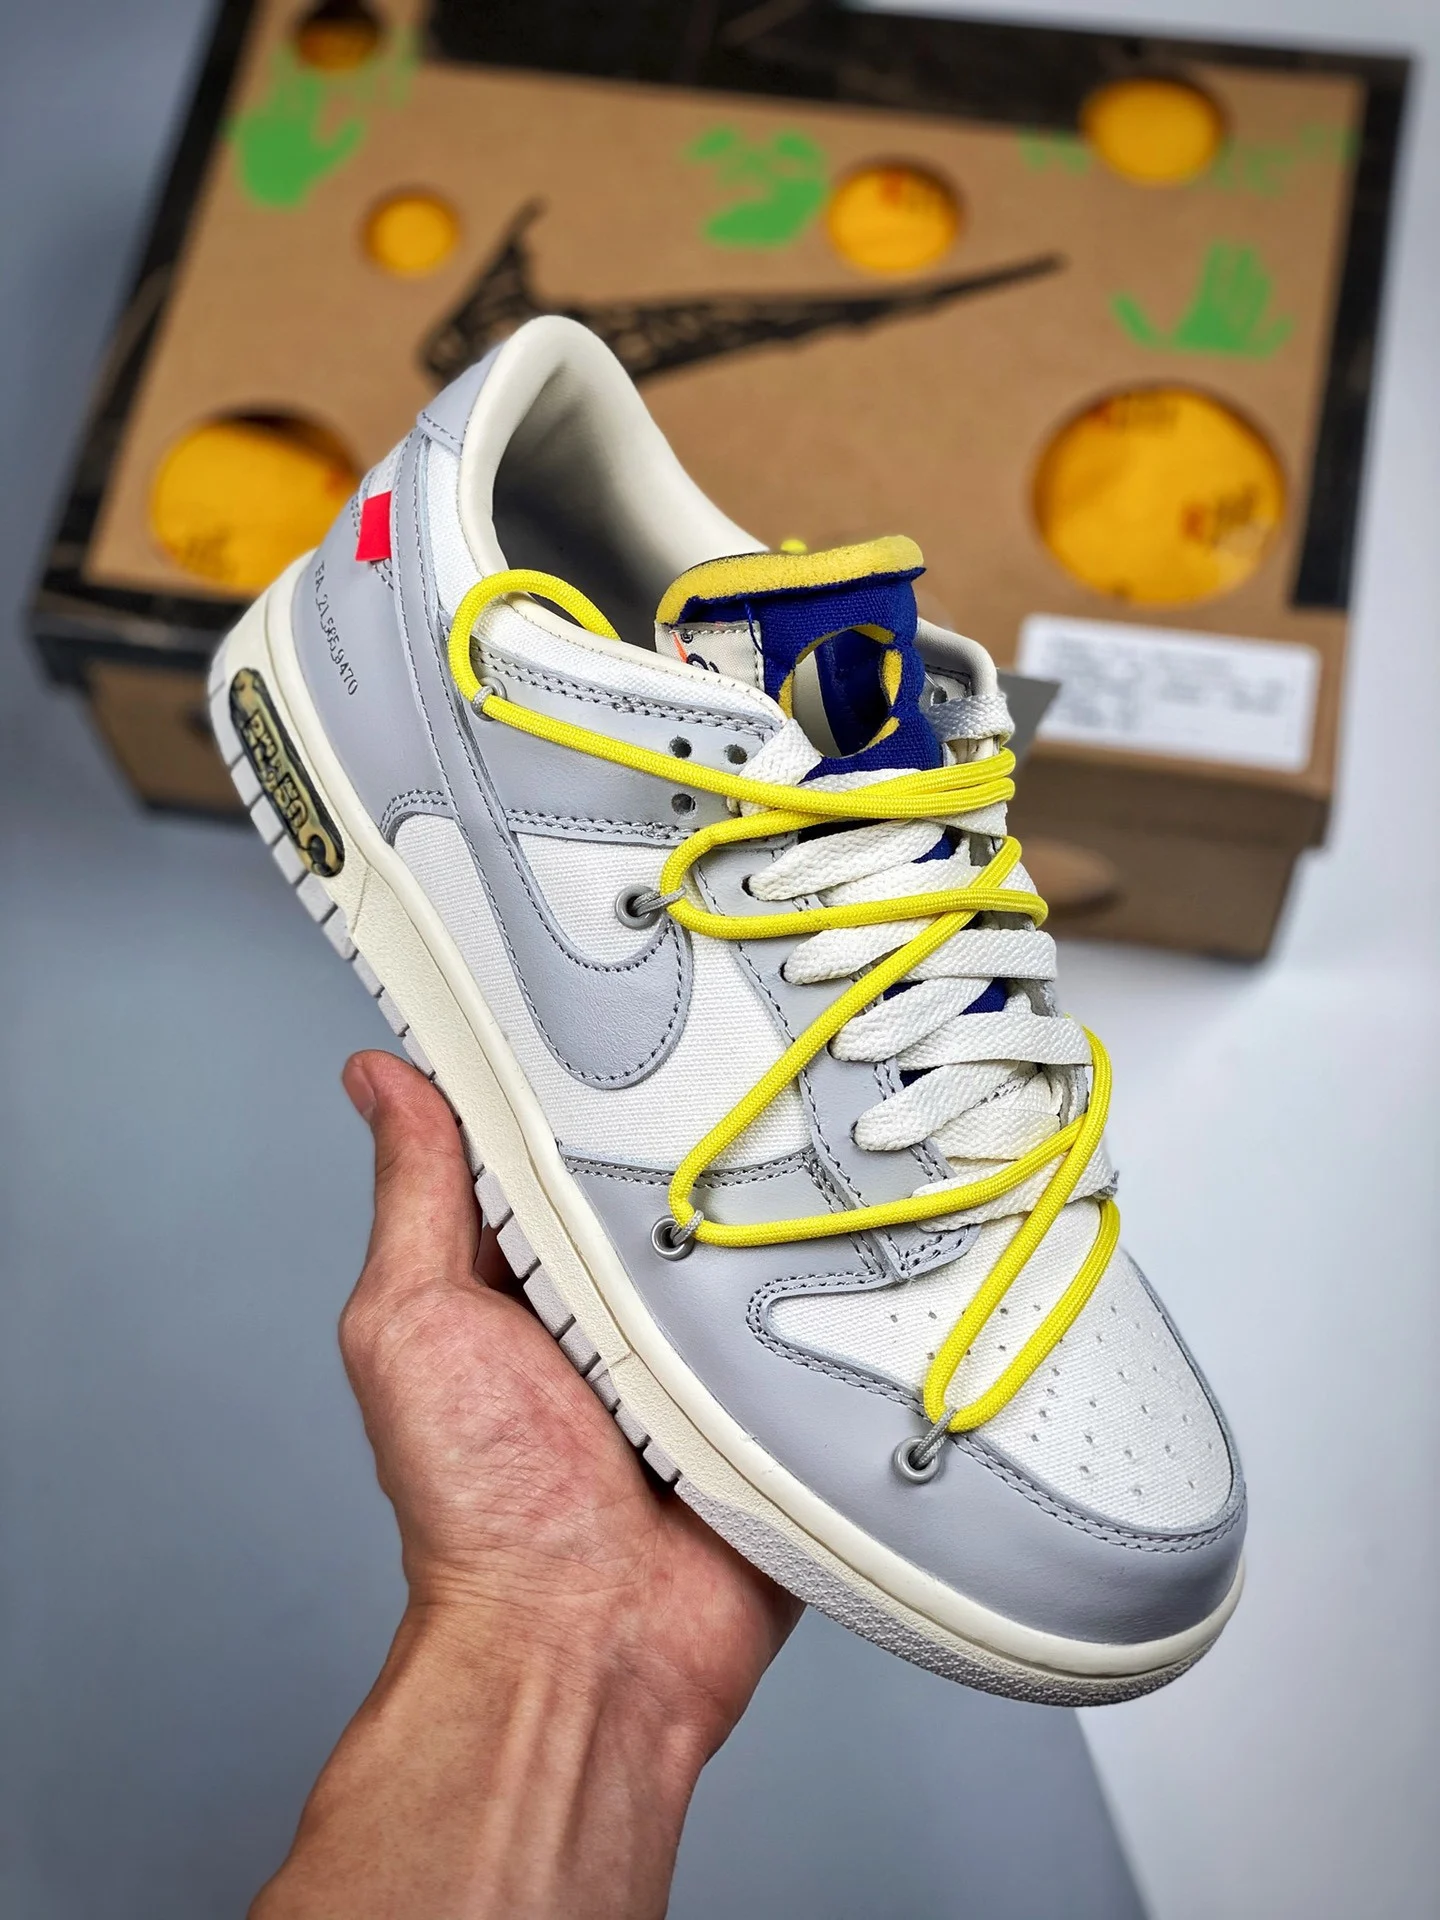 Off-White x Nike Dunk Low 27 of 50 Sail Grey For Sale